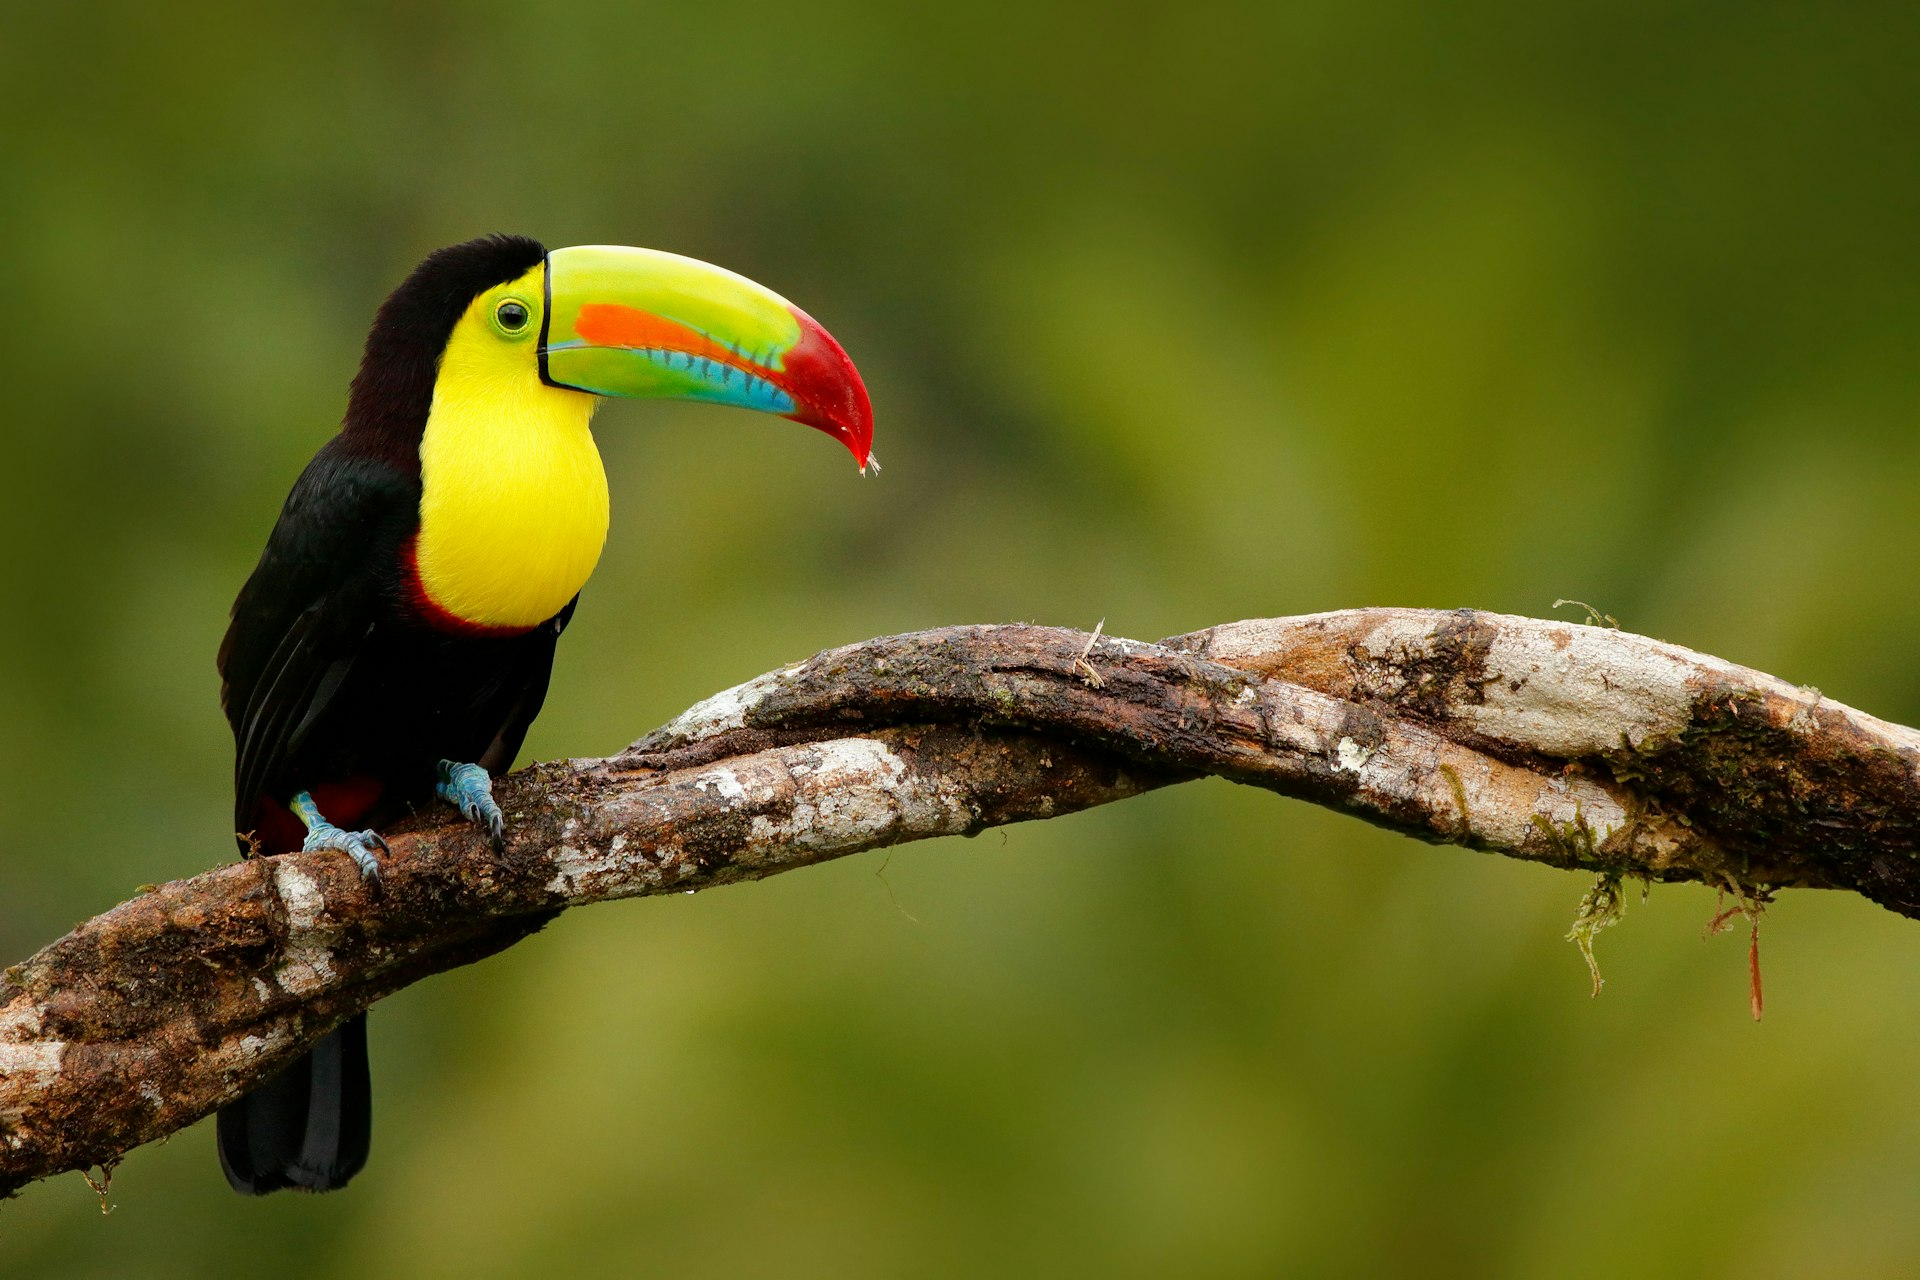 Keel-billed Toucan, Ramphastos sulfuratus, bird with big bill, sitting on branch in the forest, Panama.